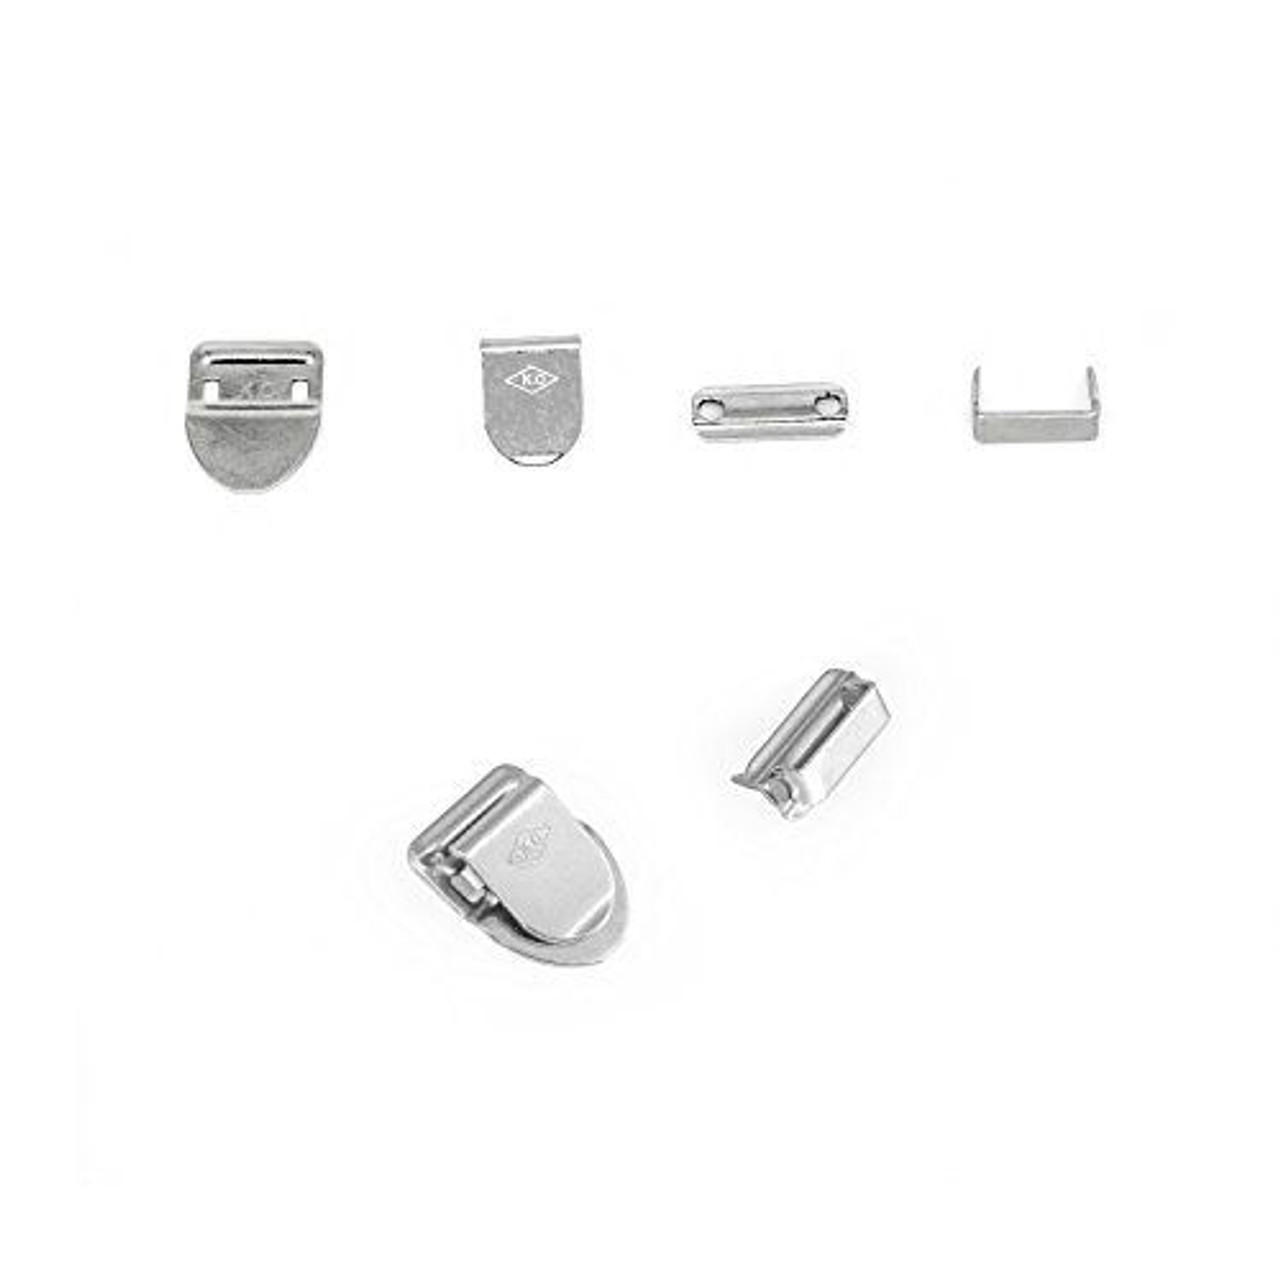 10mm Trouser Hook and Bar Fasteners (Pack of 10) - Trimming Shop